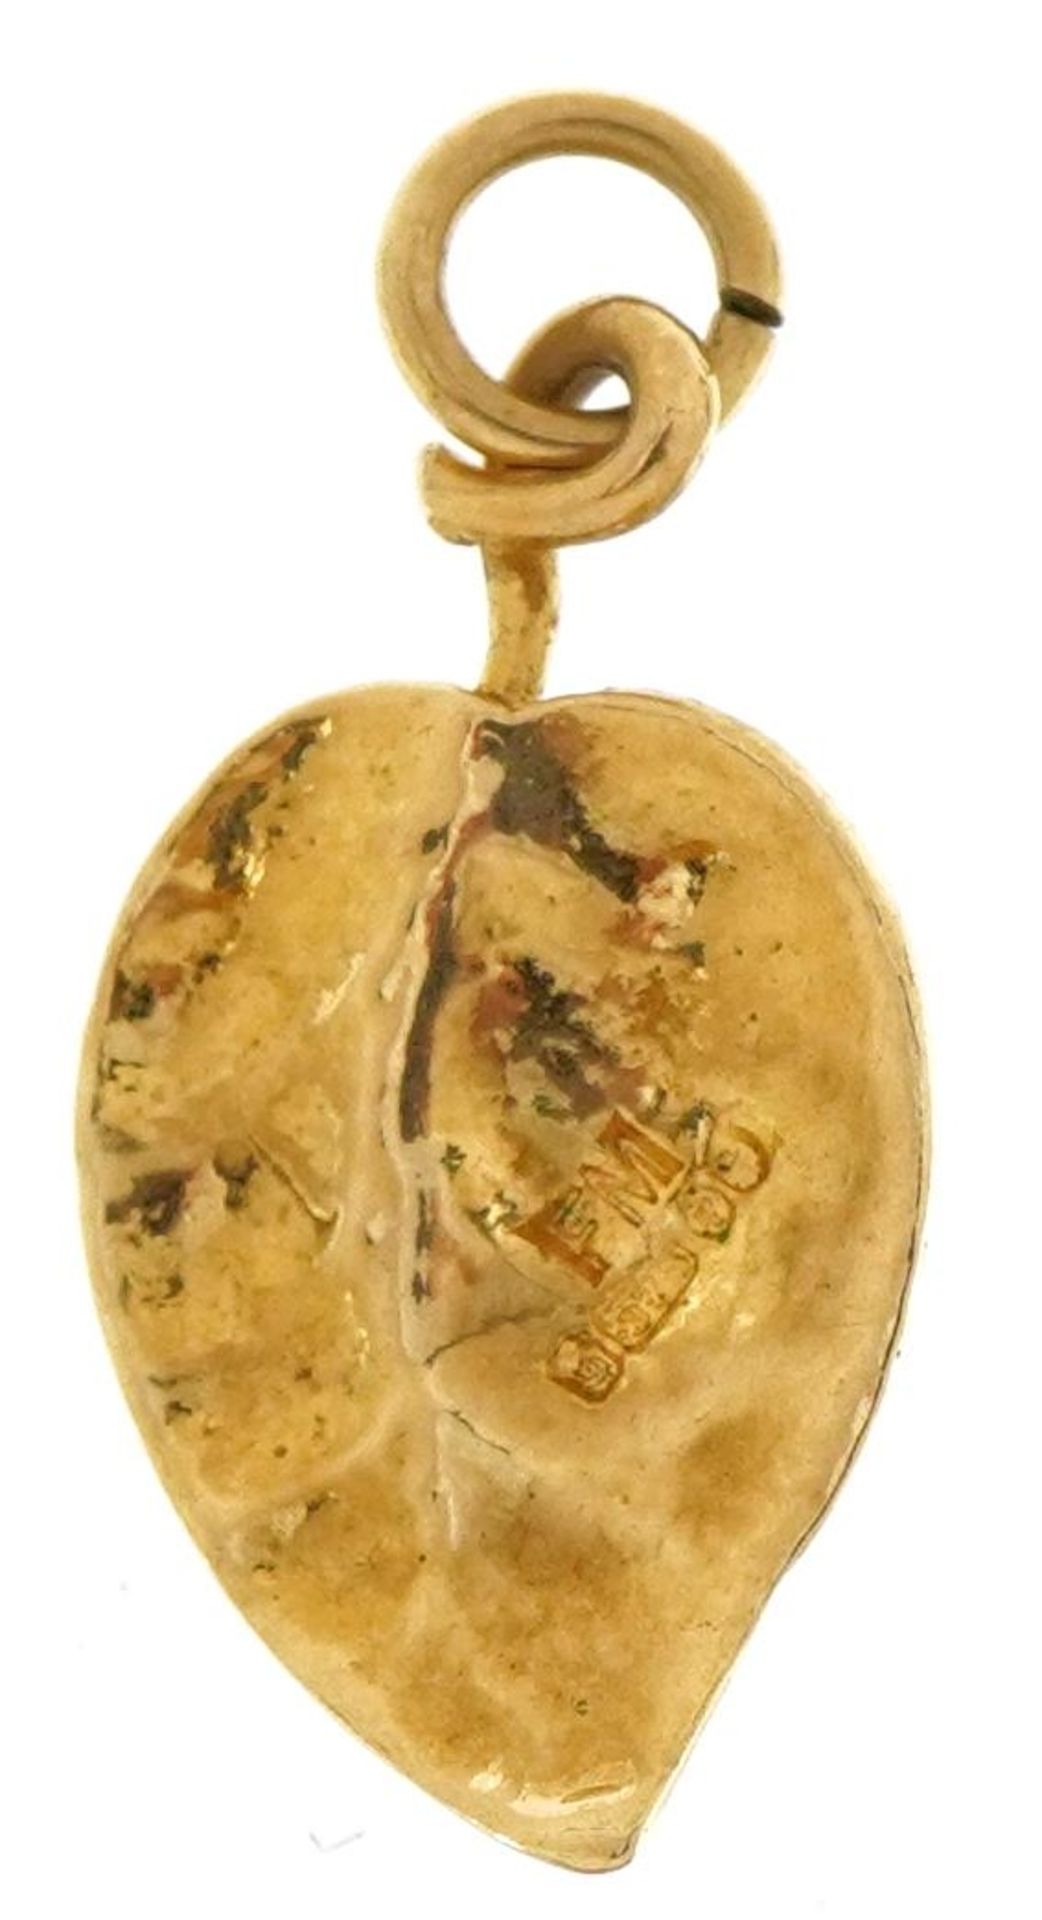 9ct gold and enamel ladybird on leaf charm, 1.9cm high, 1.3g - Image 2 of 3